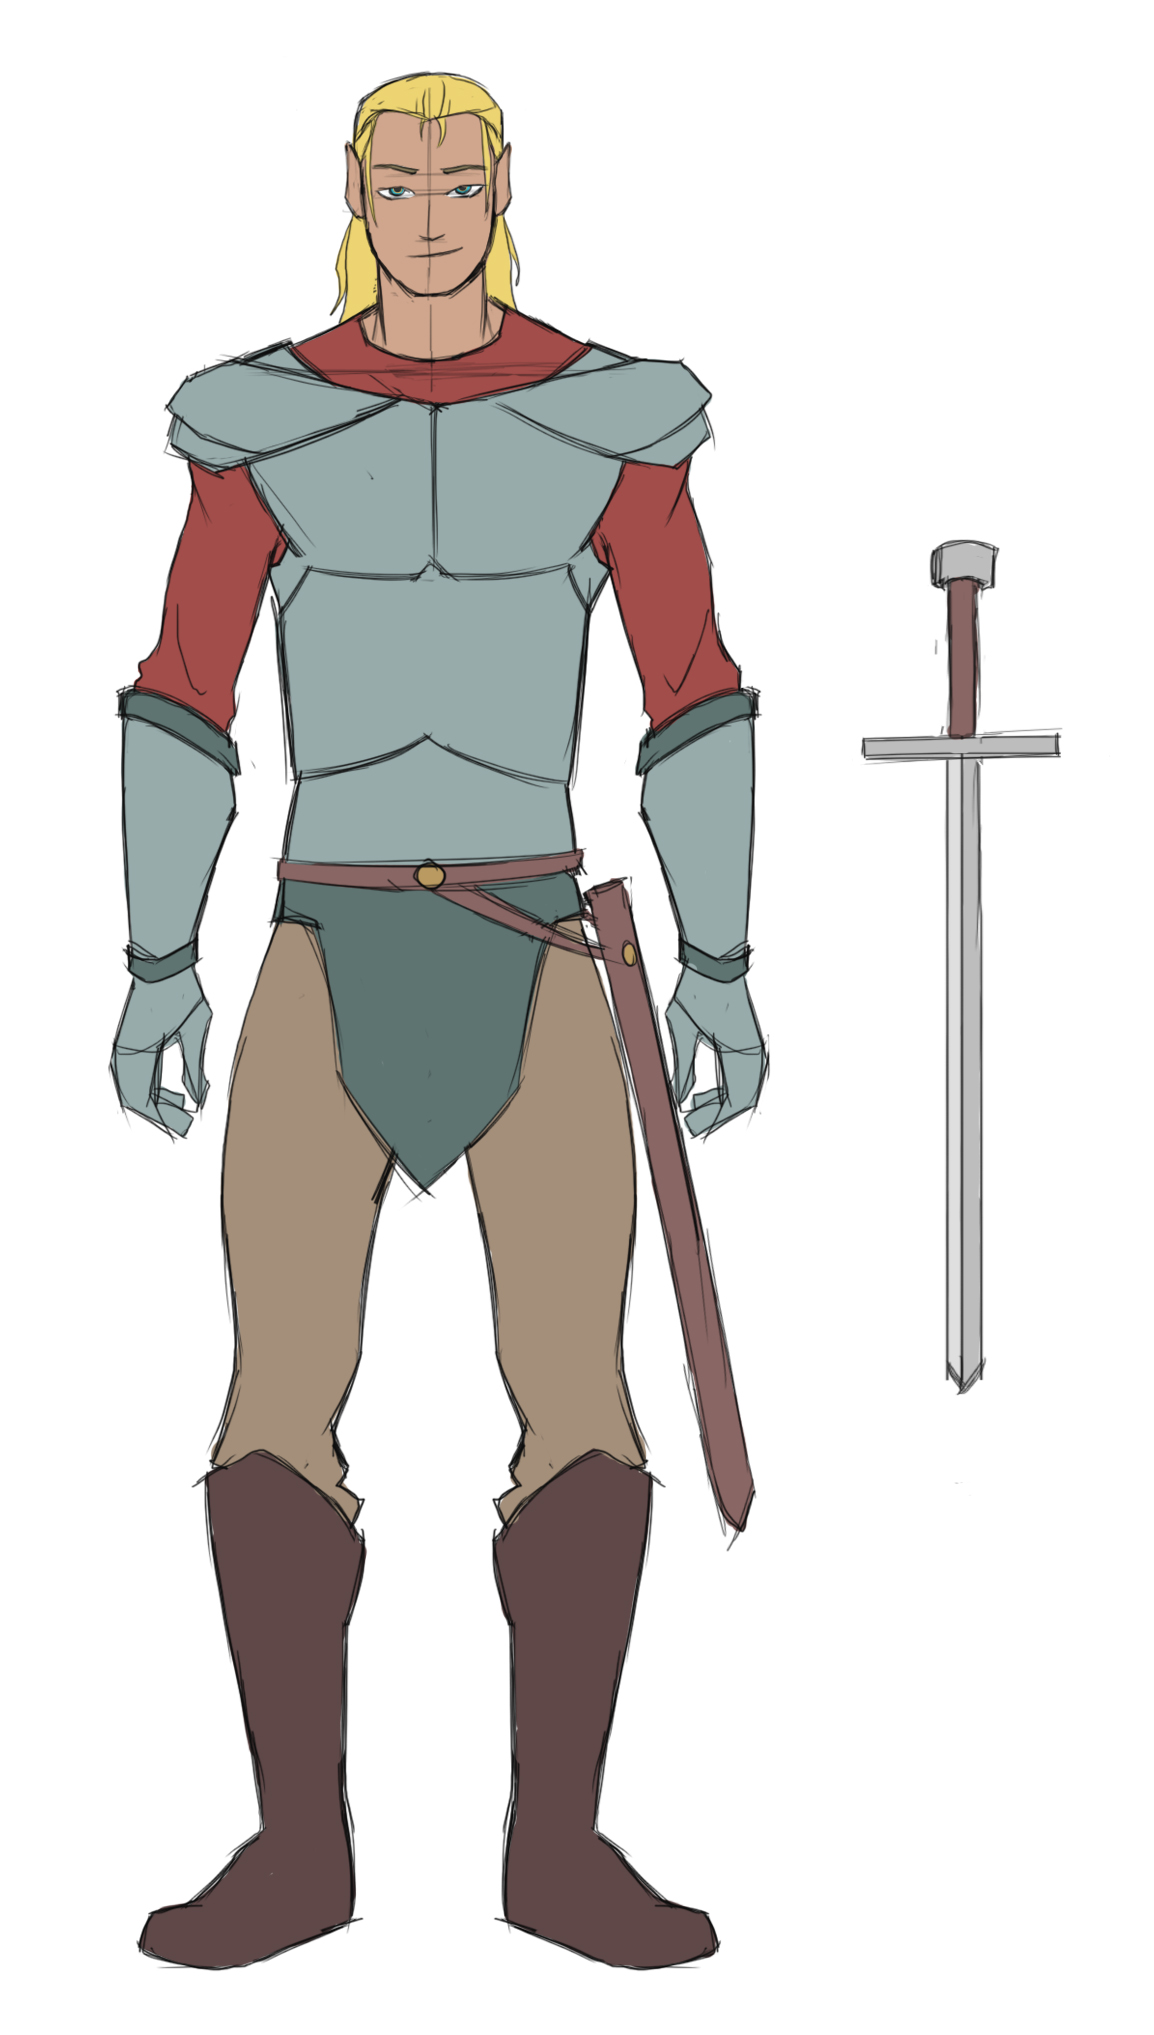 Tall, built male wearing pale armor with gauntlets, a burnt orange under-shirt, and brown pants, boots, and sword belt. He dons long hair half up – his ears slightly pointed. His sword is displayed at the side – a brown hilt and silver blade.